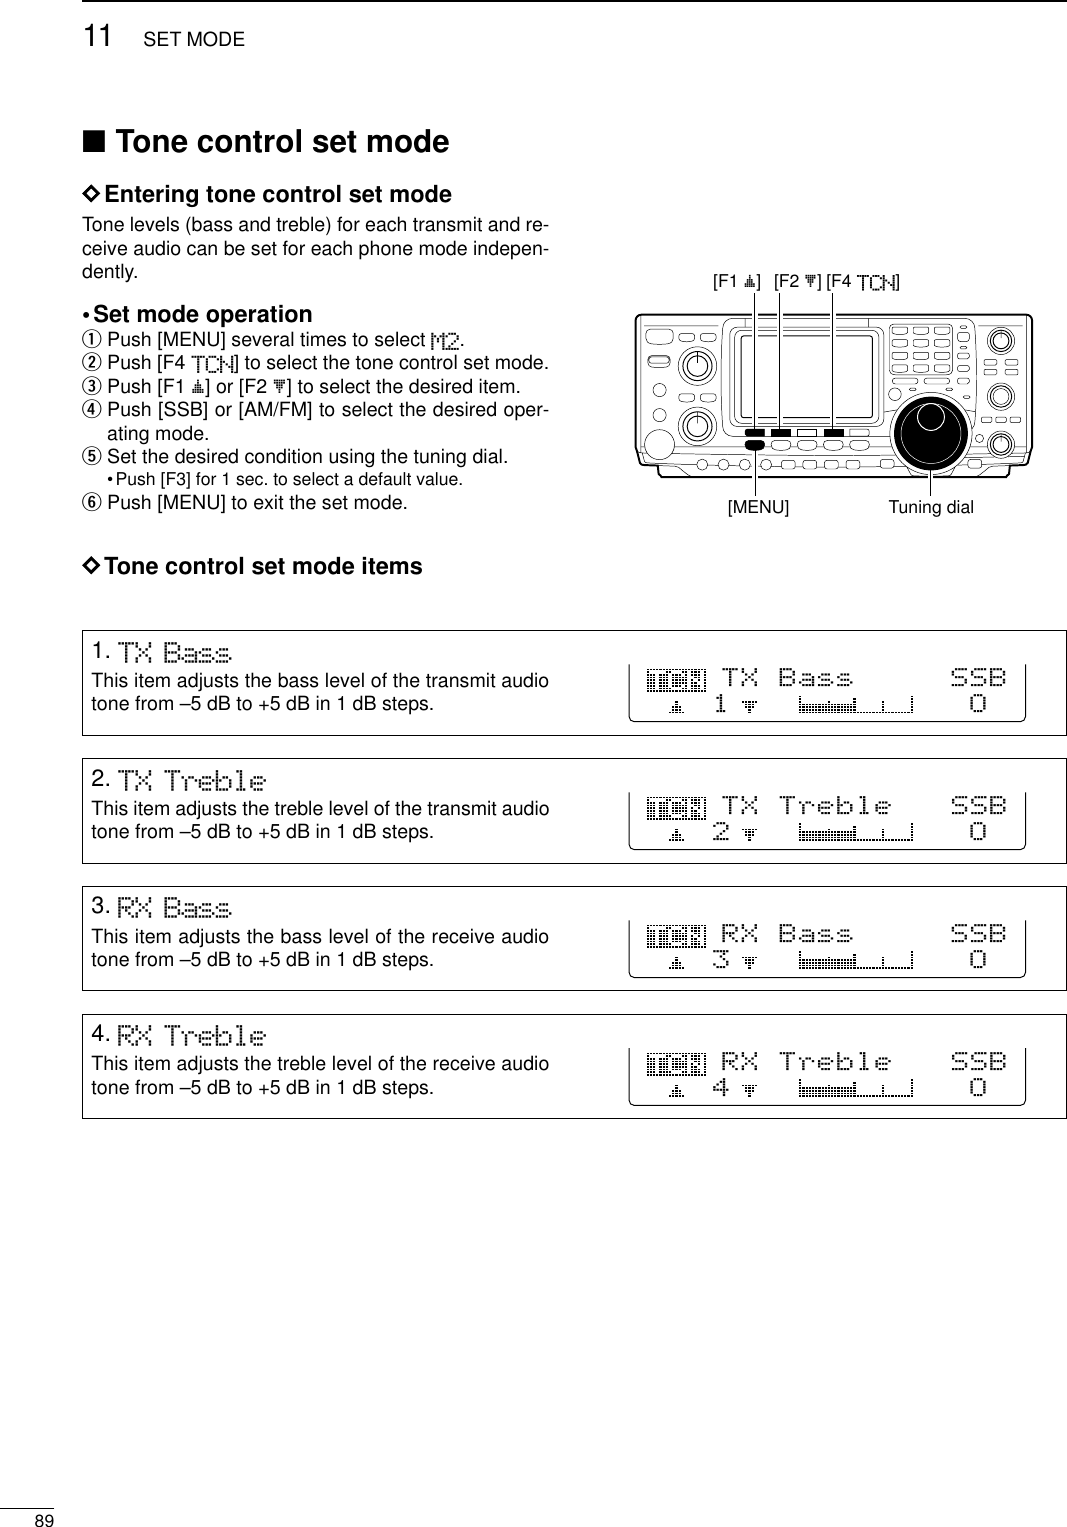 8911 SET MODE■Tone control set modeDEntering tone control set modeTone levels (bass and treble) for each transmit and re-ceive audio can be set for each phone mode indepen-dently. •Set mode operationqPush [MENU] several times to select M2.wPush [F4 TCN] to select the tone control set mode.ePush [F1 ≤] or [F2 ≥] to select the desired item.rPush [SSB] or [AM/FM] to select the desired oper-ating mode.tSet the desired condition using the tuning dial.•Push [F3] for 1 sec. to select a default value.yPush [MENU] to exit the set mode.DTone control set mode items[F1 ≤]Tuning dial[MENU][F2 ≥] [F4 TCN]1. TX BassThis item adjusts the bass level of the transmit audiotone from –5 dB to +5 dB in 1 dB steps.TX Bass     SSBO12. TX TrebleThis item adjusts the treble level of the transmit audiotone from –5 dB to +5 dB in 1 dB steps.TX Treble   SSBO23. RX BassThis item adjusts the bass level of the receive audiotone from –5 dB to +5 dB in 1 dB steps.RX Bass     SSBO34. RX TrebleThis item adjusts the treble level of the receive audiotone from –5 dB to +5 dB in 1 dB steps.RX Treble   SSBO4